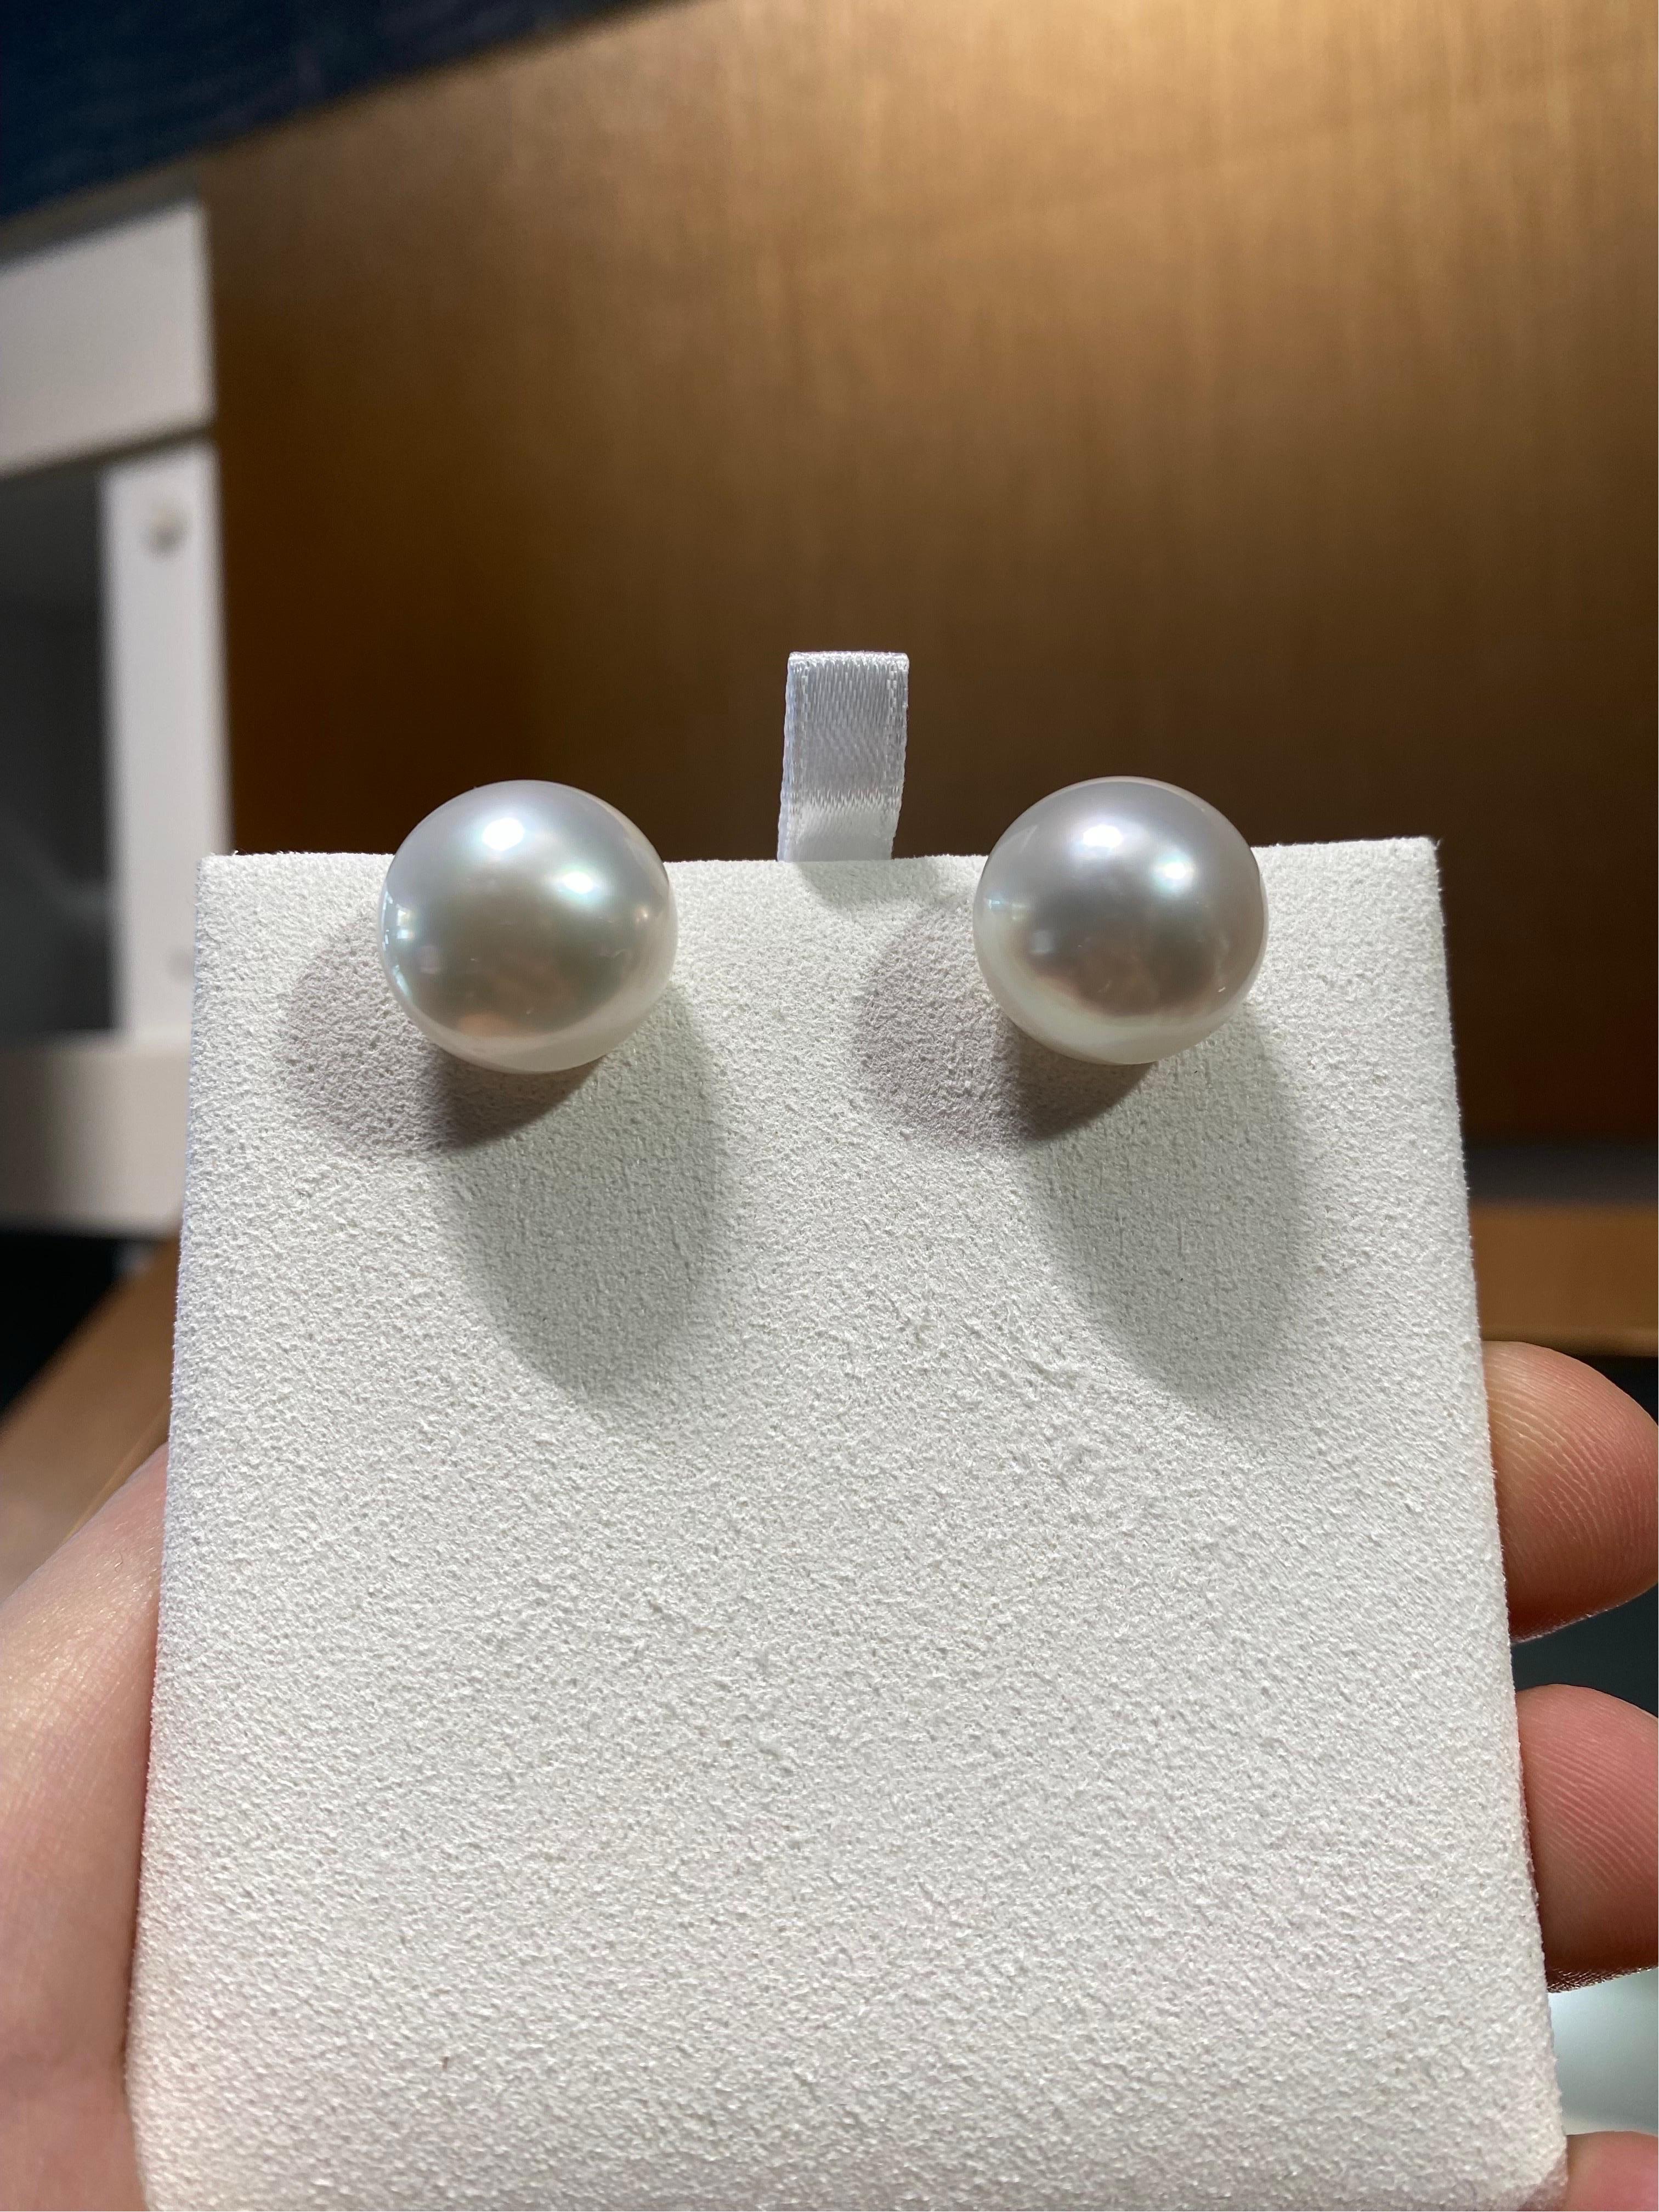 A pair of 16.5mm white south sea pearl earrings stud with 18k yellow gold backing. The pearls are of high button shape with very good lustre. The pearls have clean face with minor blemishes at the back. The pearls are white in colour with green and